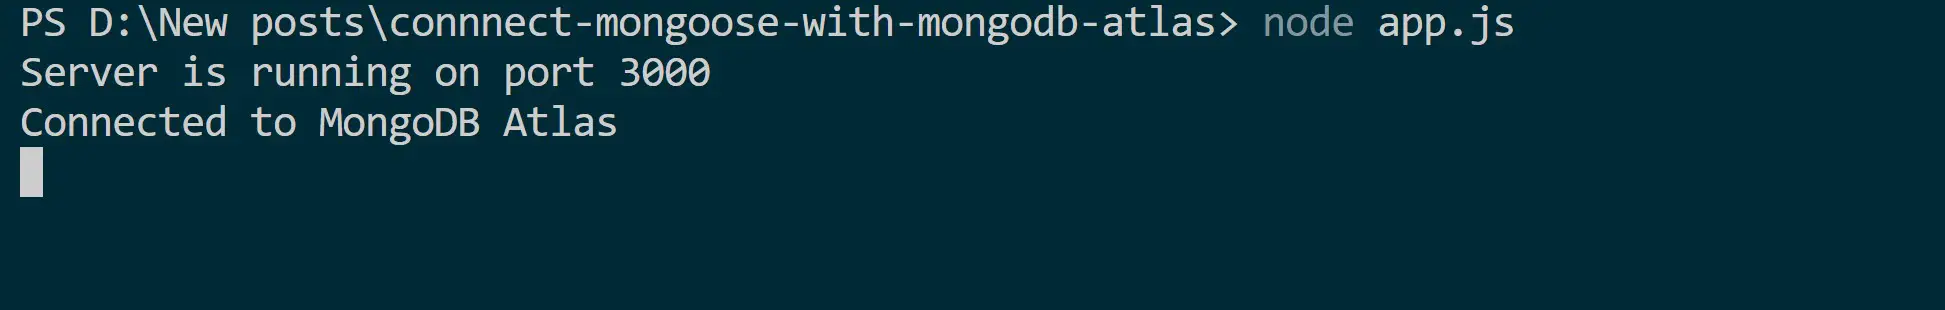 How to connect Mongoose with MongoDB Atlas Cluster Login